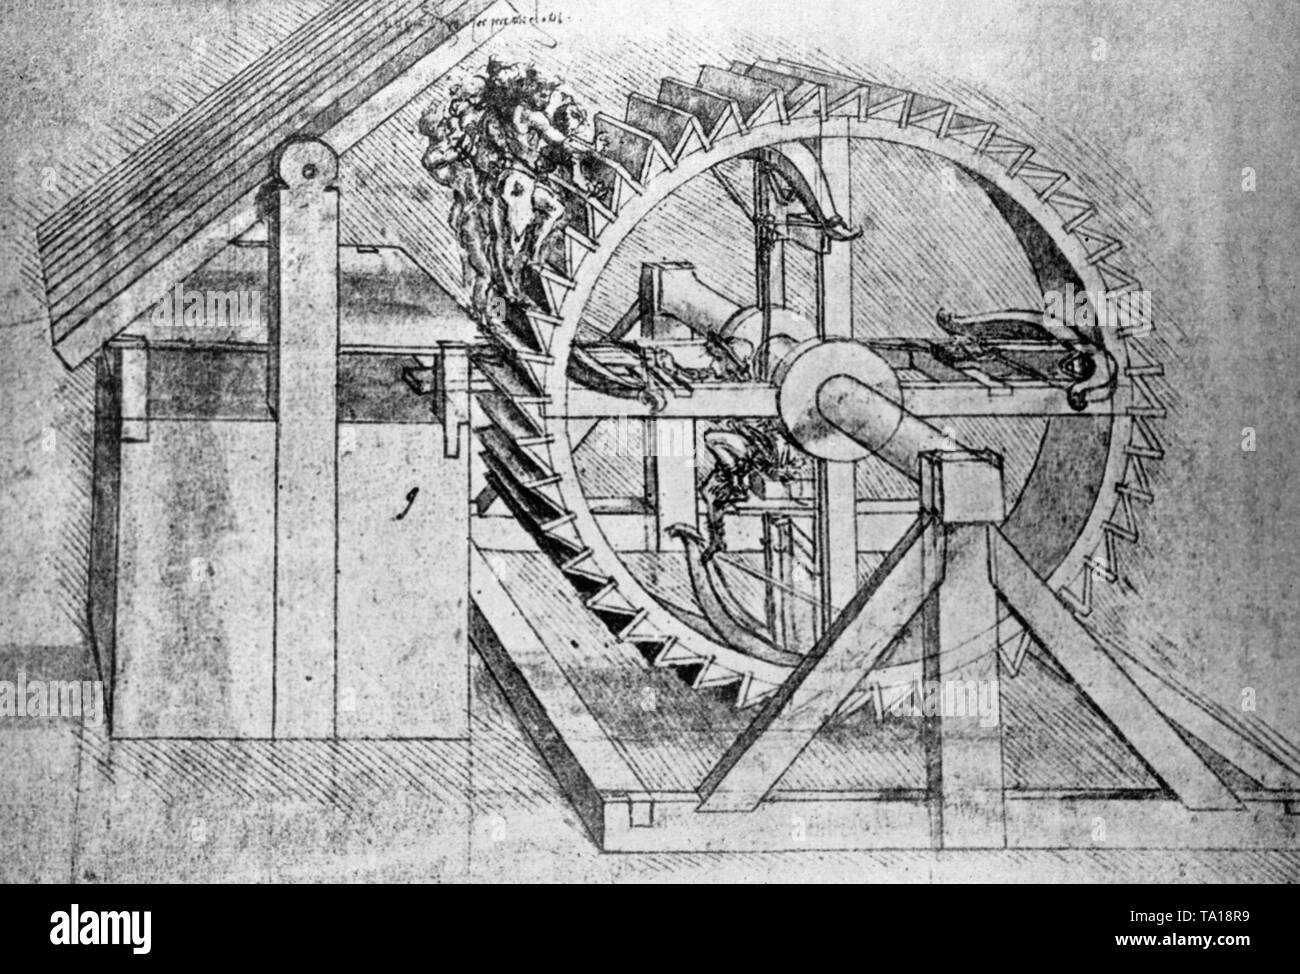 Photo of a war machine designed by Leonardo Da Vinci to shoot several crossbows. A treadwheel moved by persons stretches the crossbows and fires them off. Undated photo. Stock Photo